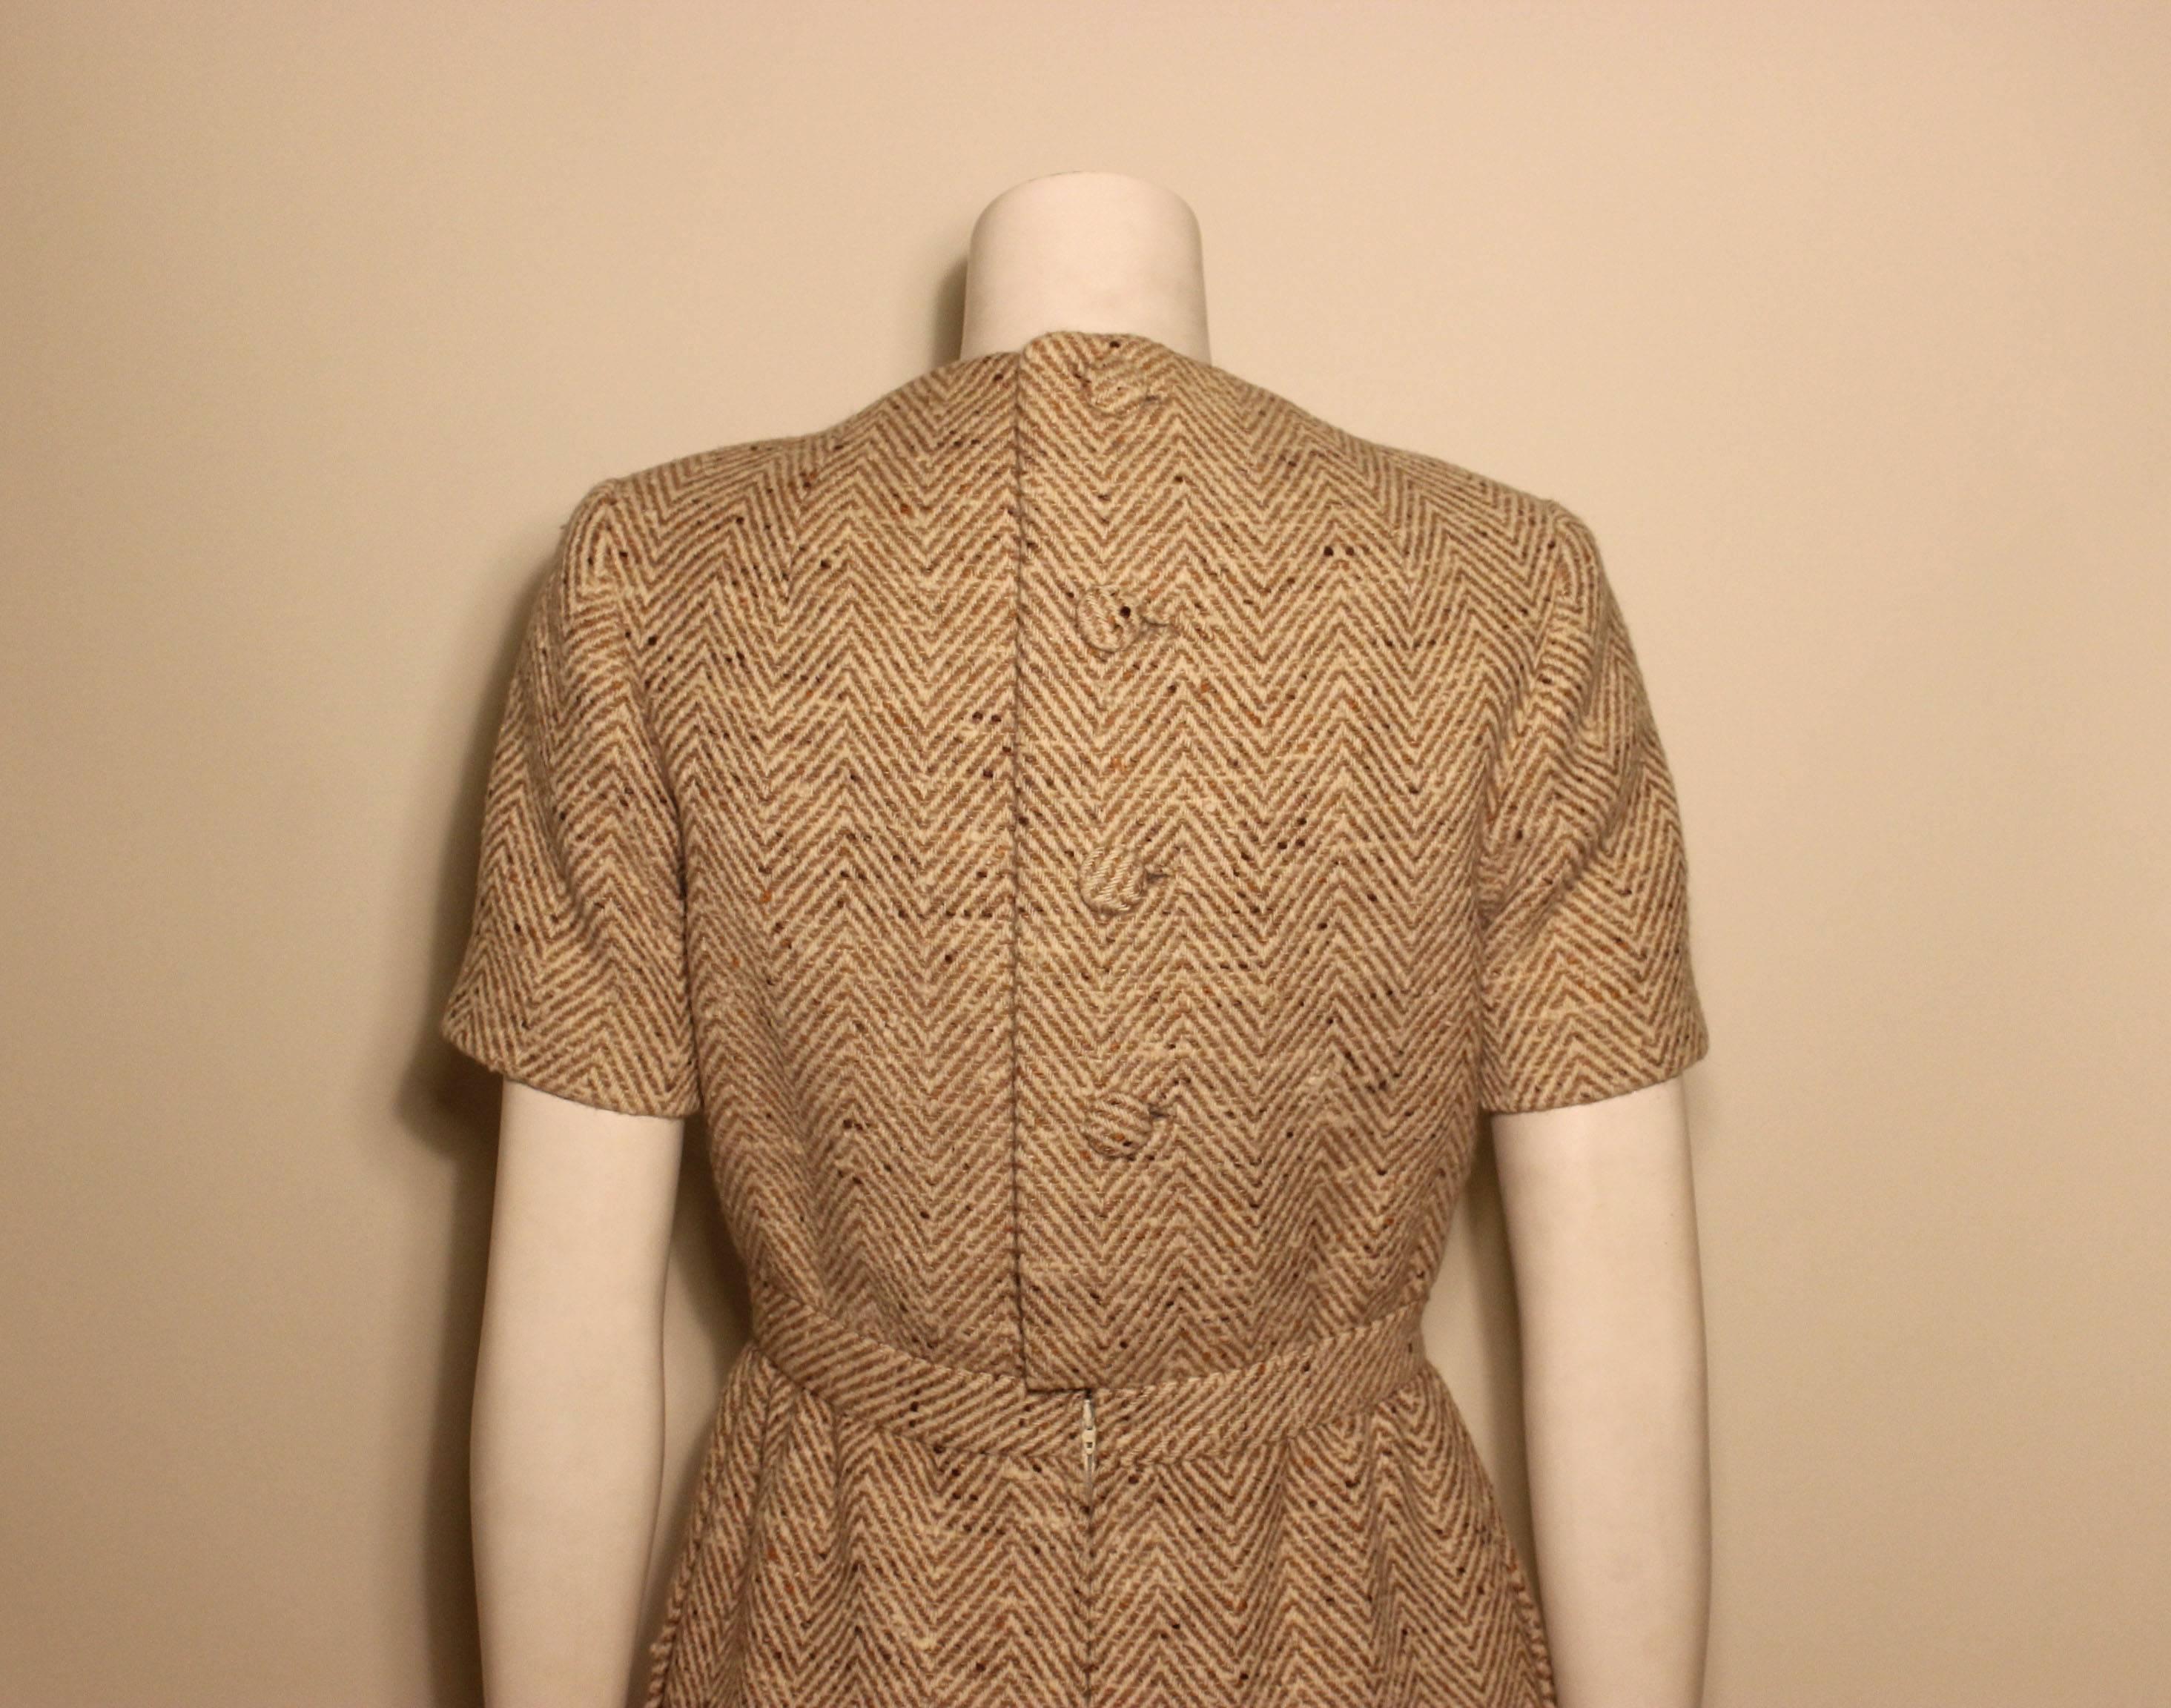 Vintage Pauline Trigere Wool Tweed Dress In Excellent Condition For Sale In New York, NY